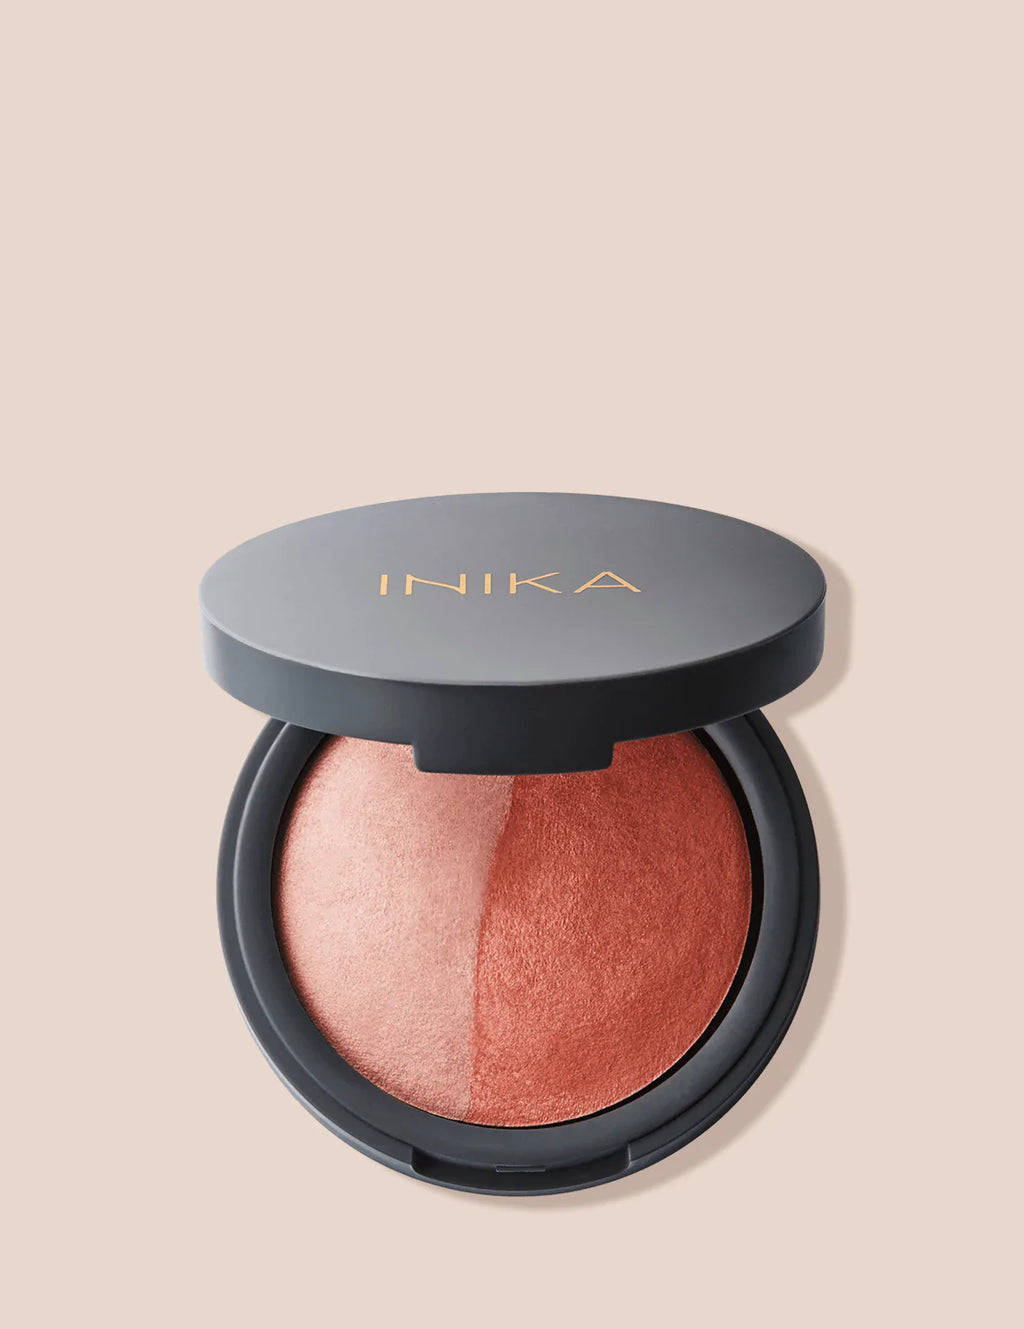 Burnt peach mineral blush is a beautiful color that goes well with most skin tones but I find it to look best on warm or neutral skin tones